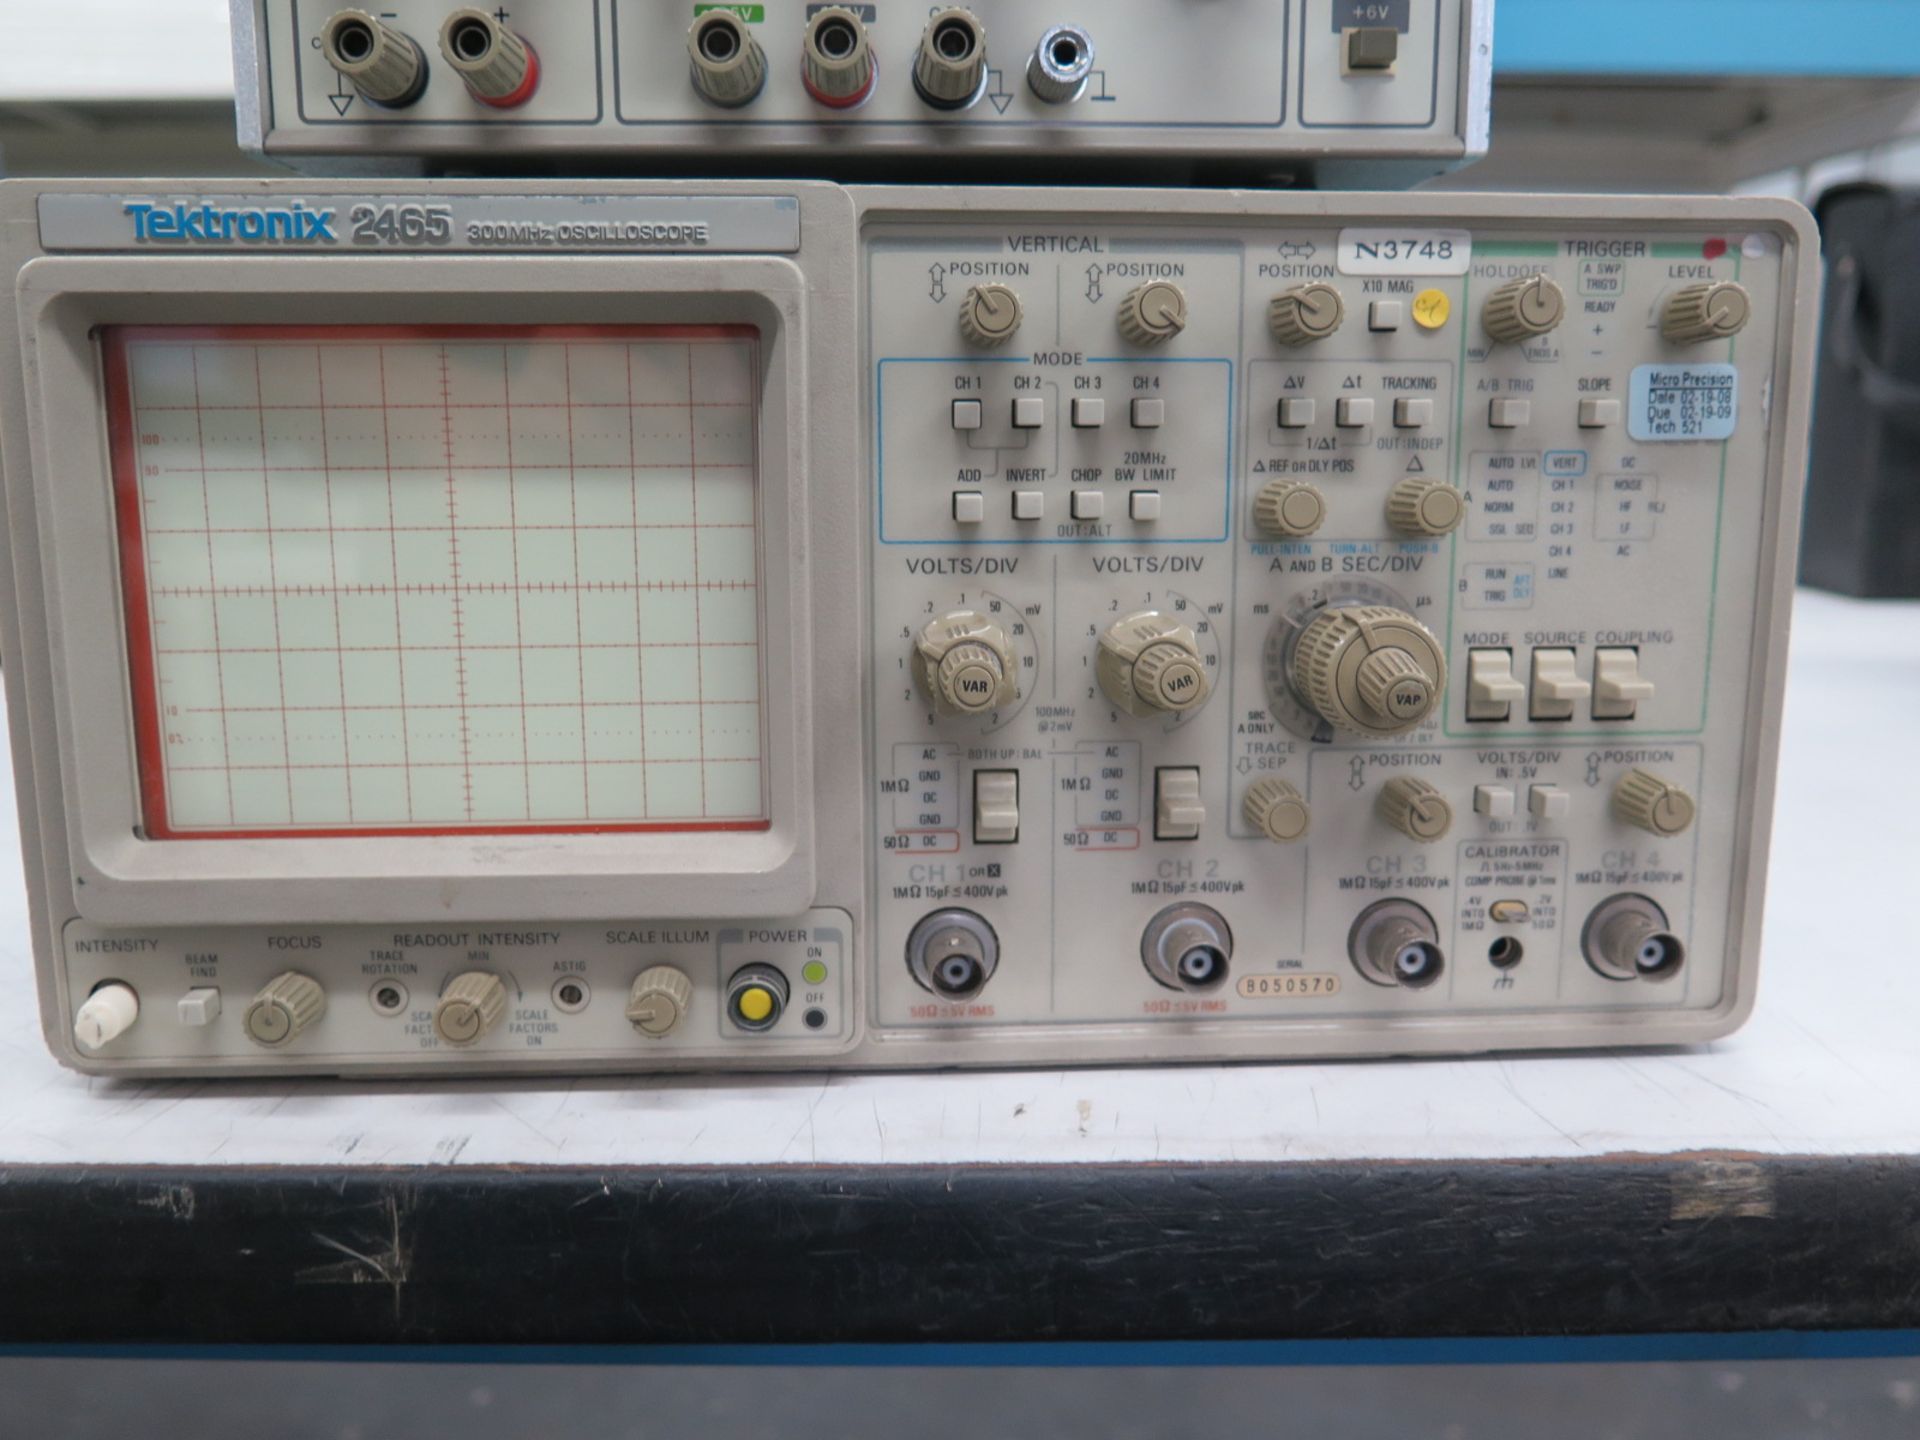 Tektronix mdl. 2465 300MHz Oscilloscope, Leader mdl. LPS152 DC Tracking Power Supply, Fluke mdl. A90 - Image 2 of 6